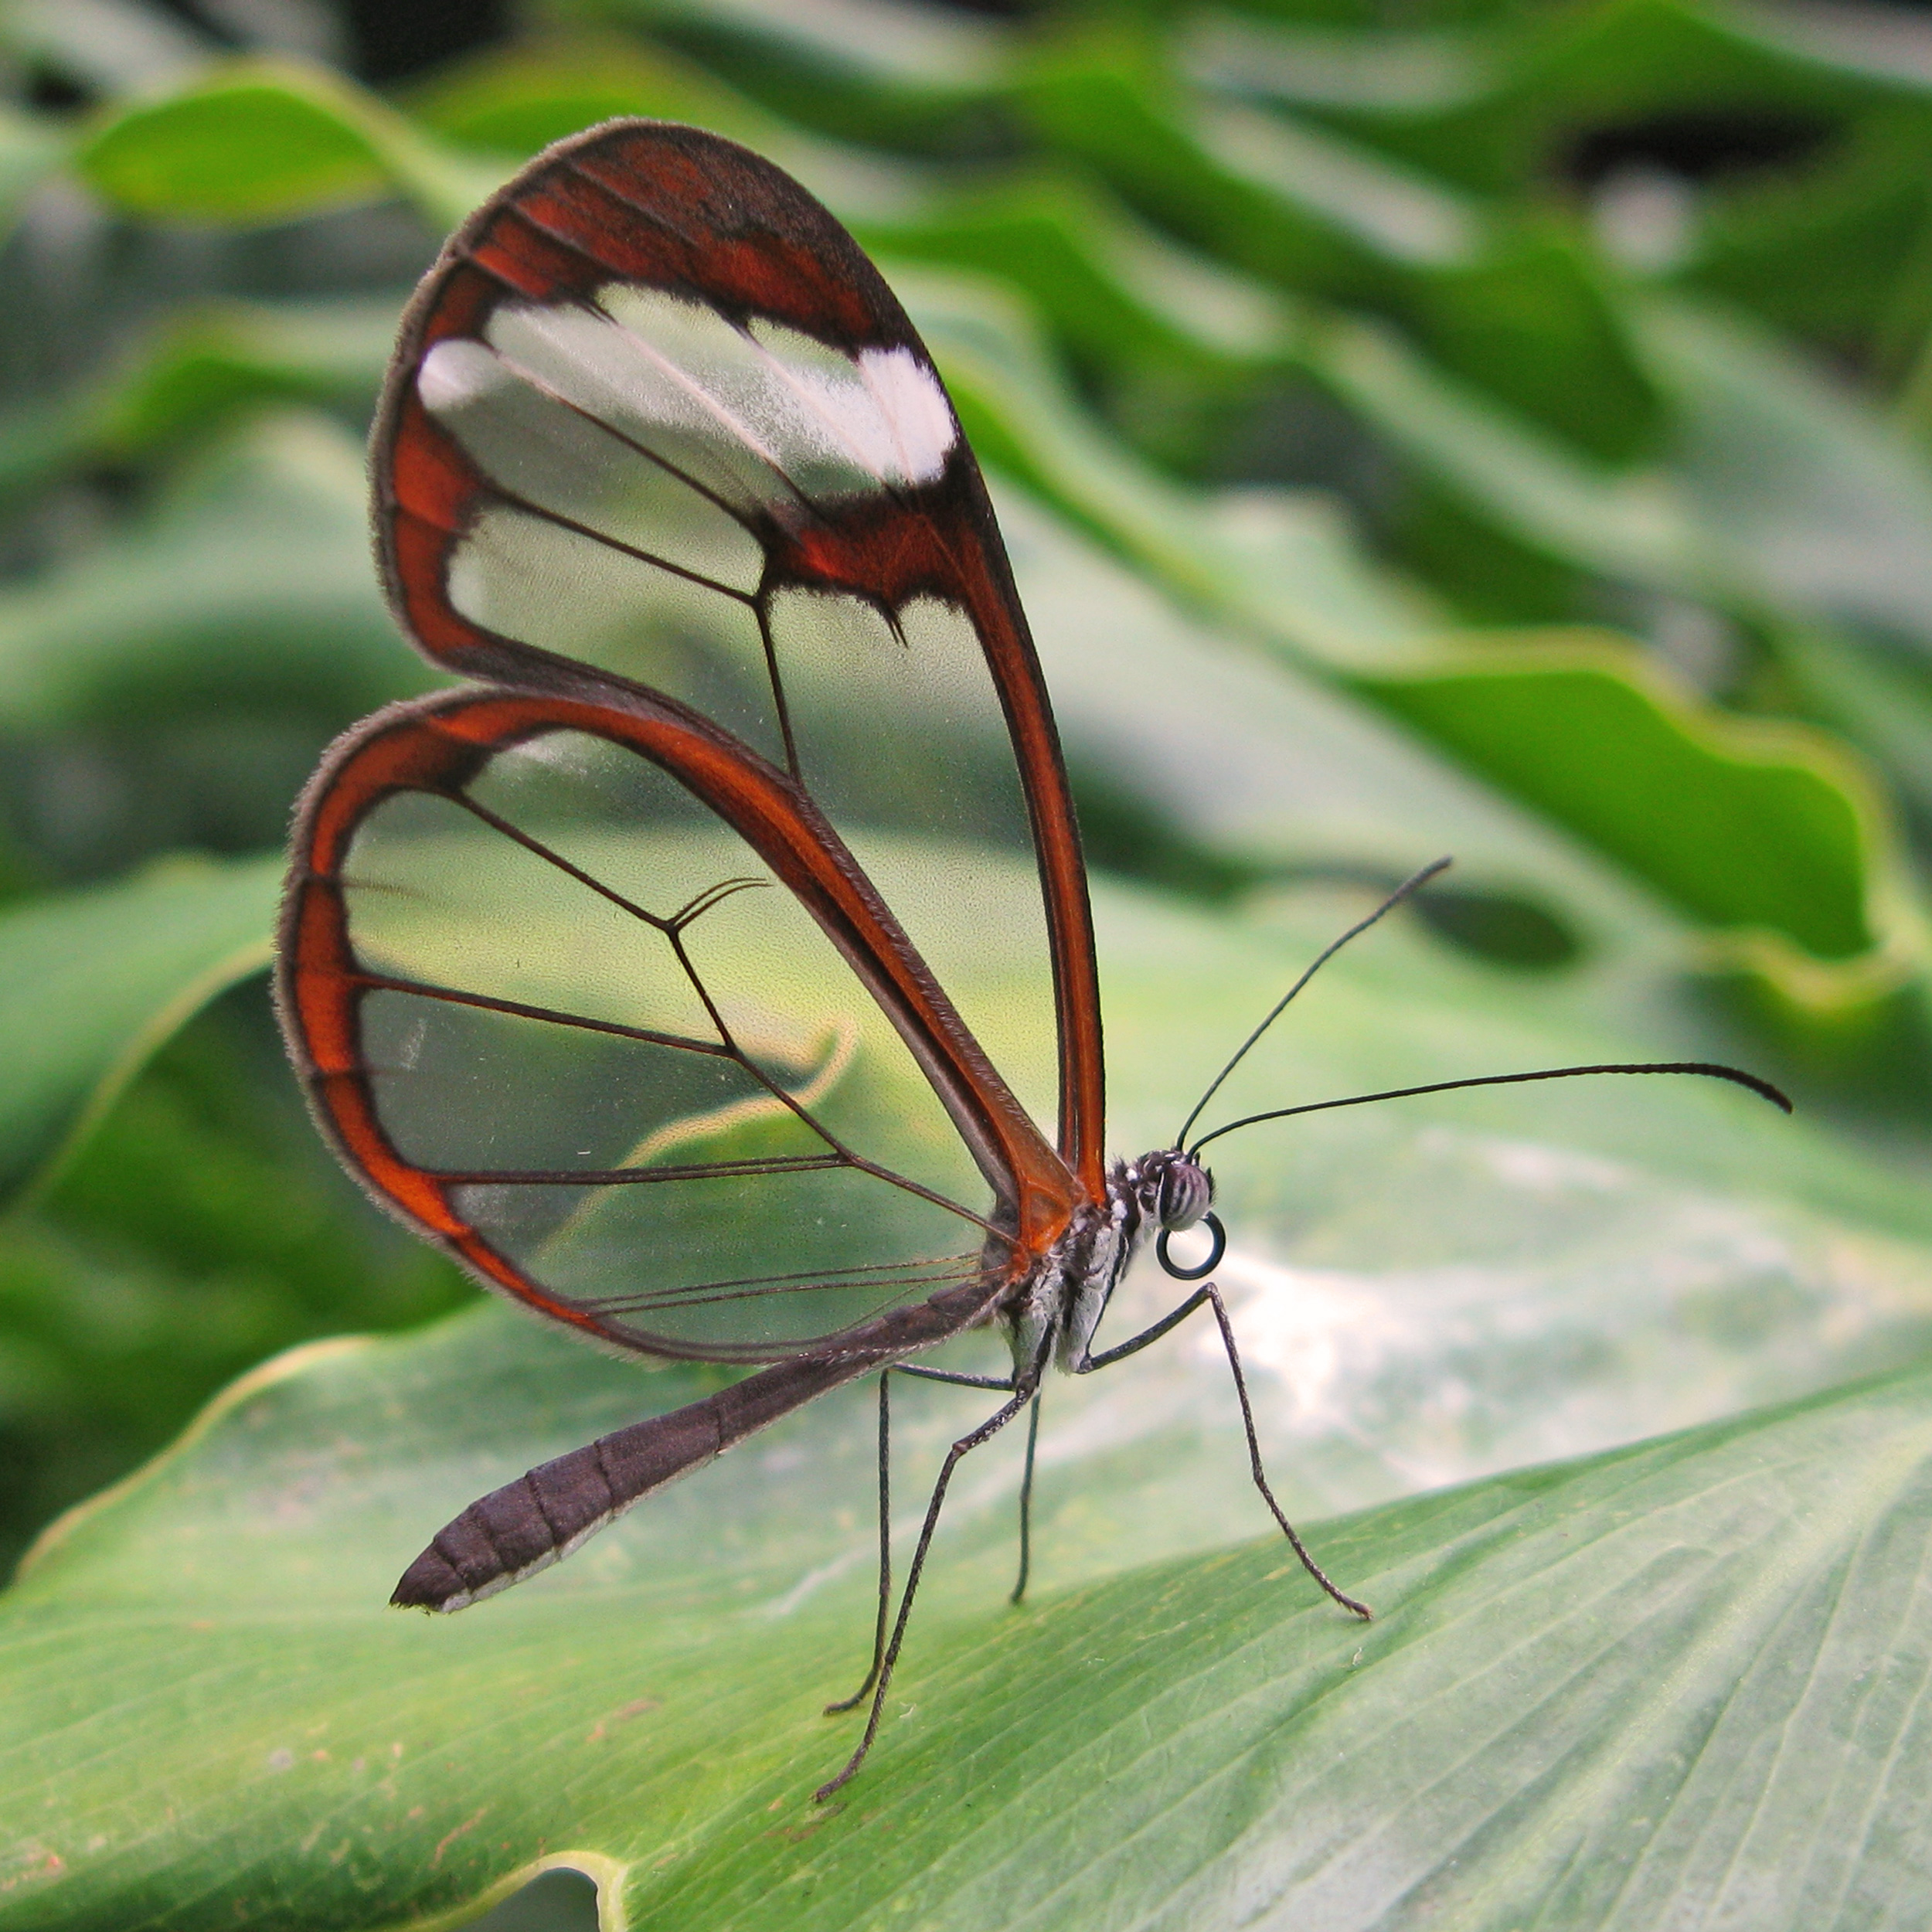 A glass-winged butterfly.